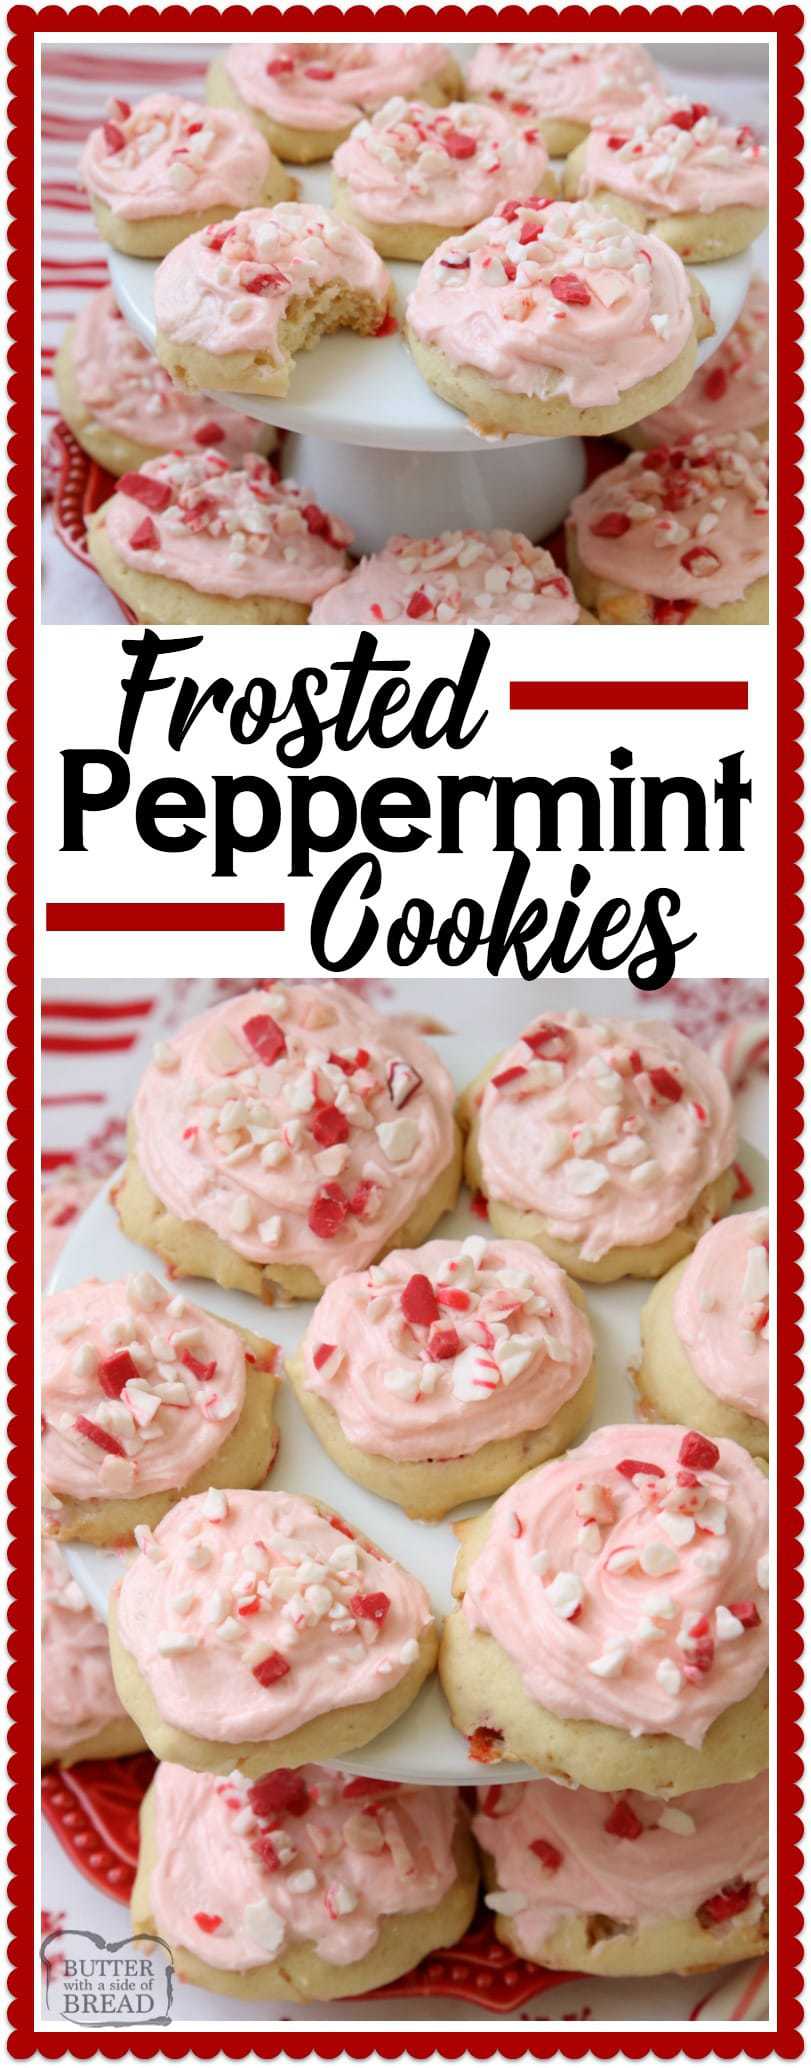 Frosted Peppermint Cookies are soft, pillowy cookies baked with peppermint candy and topped with peppermint vanilla buttercream and candy cane pieces. #Christmas #Cookie #recipe made with #peppermint perfect for the #holidays from Butter With A Side of Bread